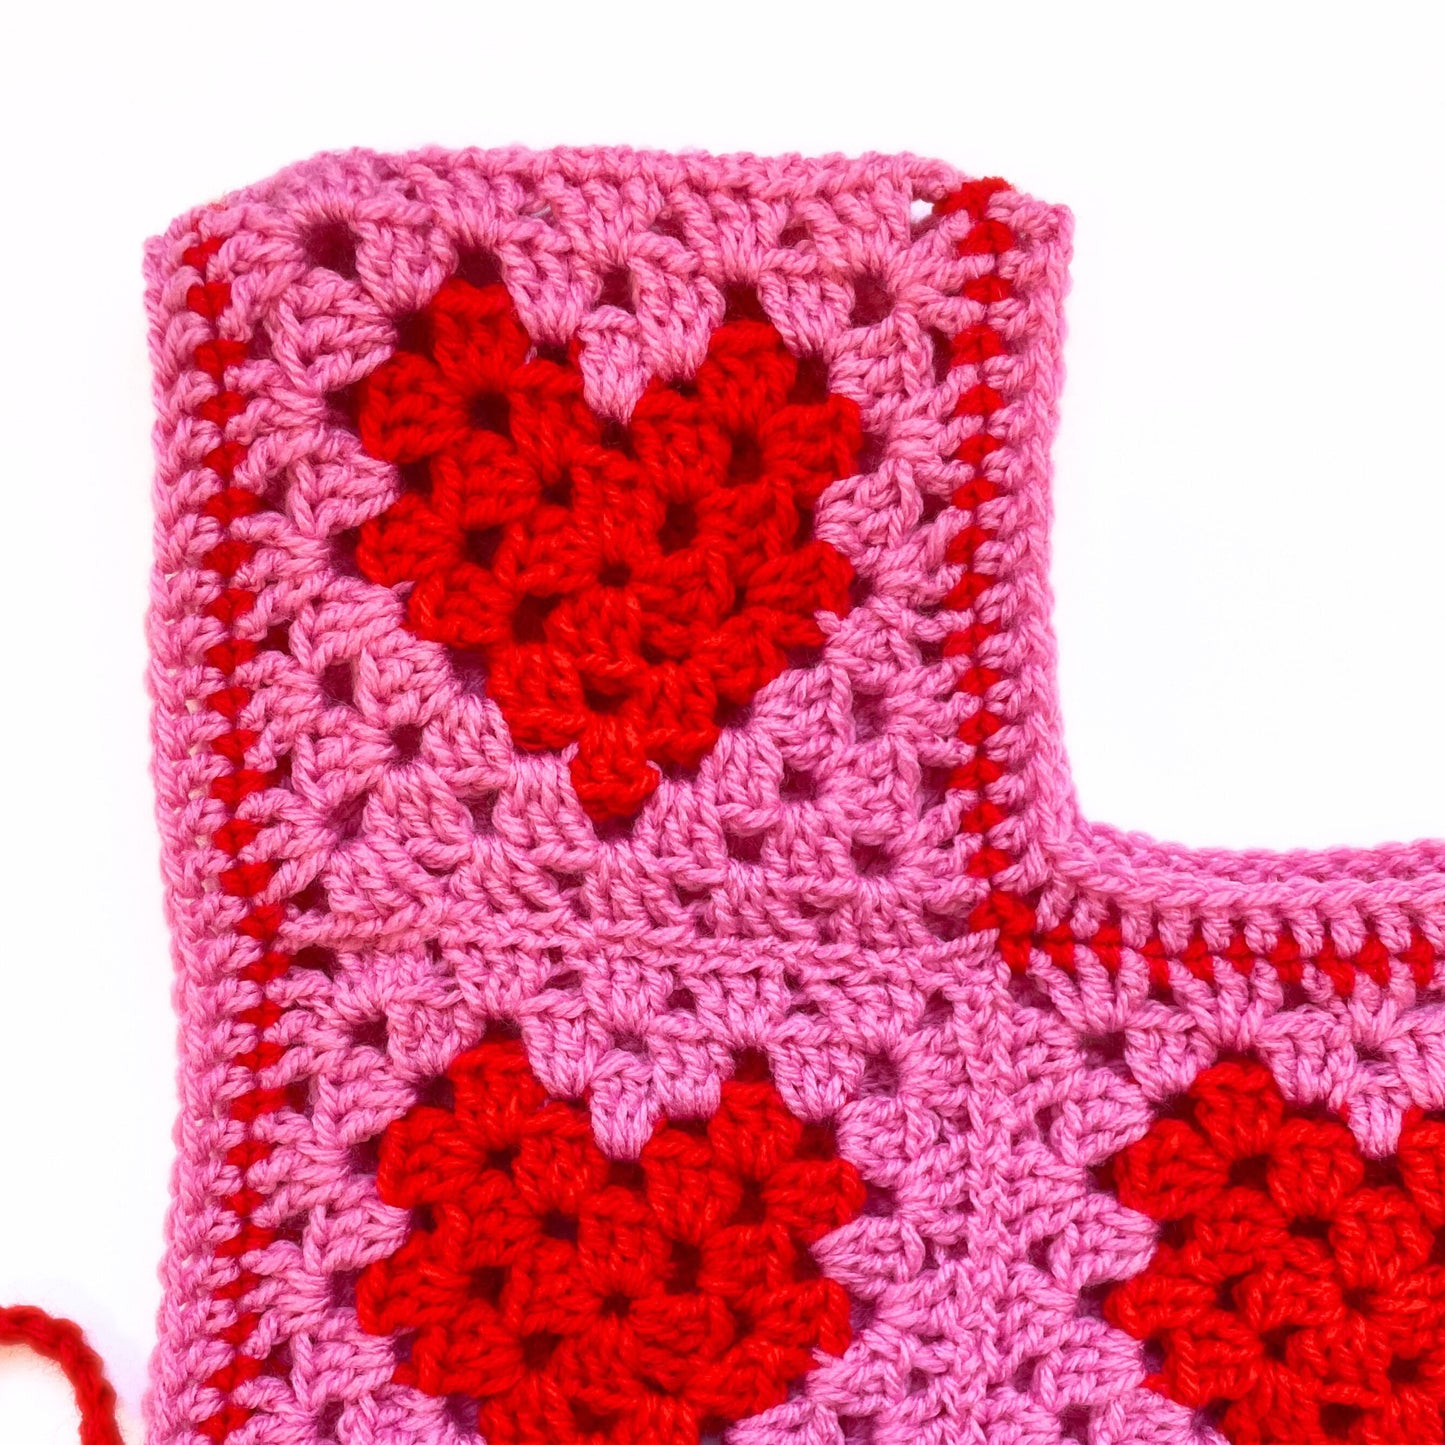 Handmade Red and Pink Love Heart Crochet Vest With Ties